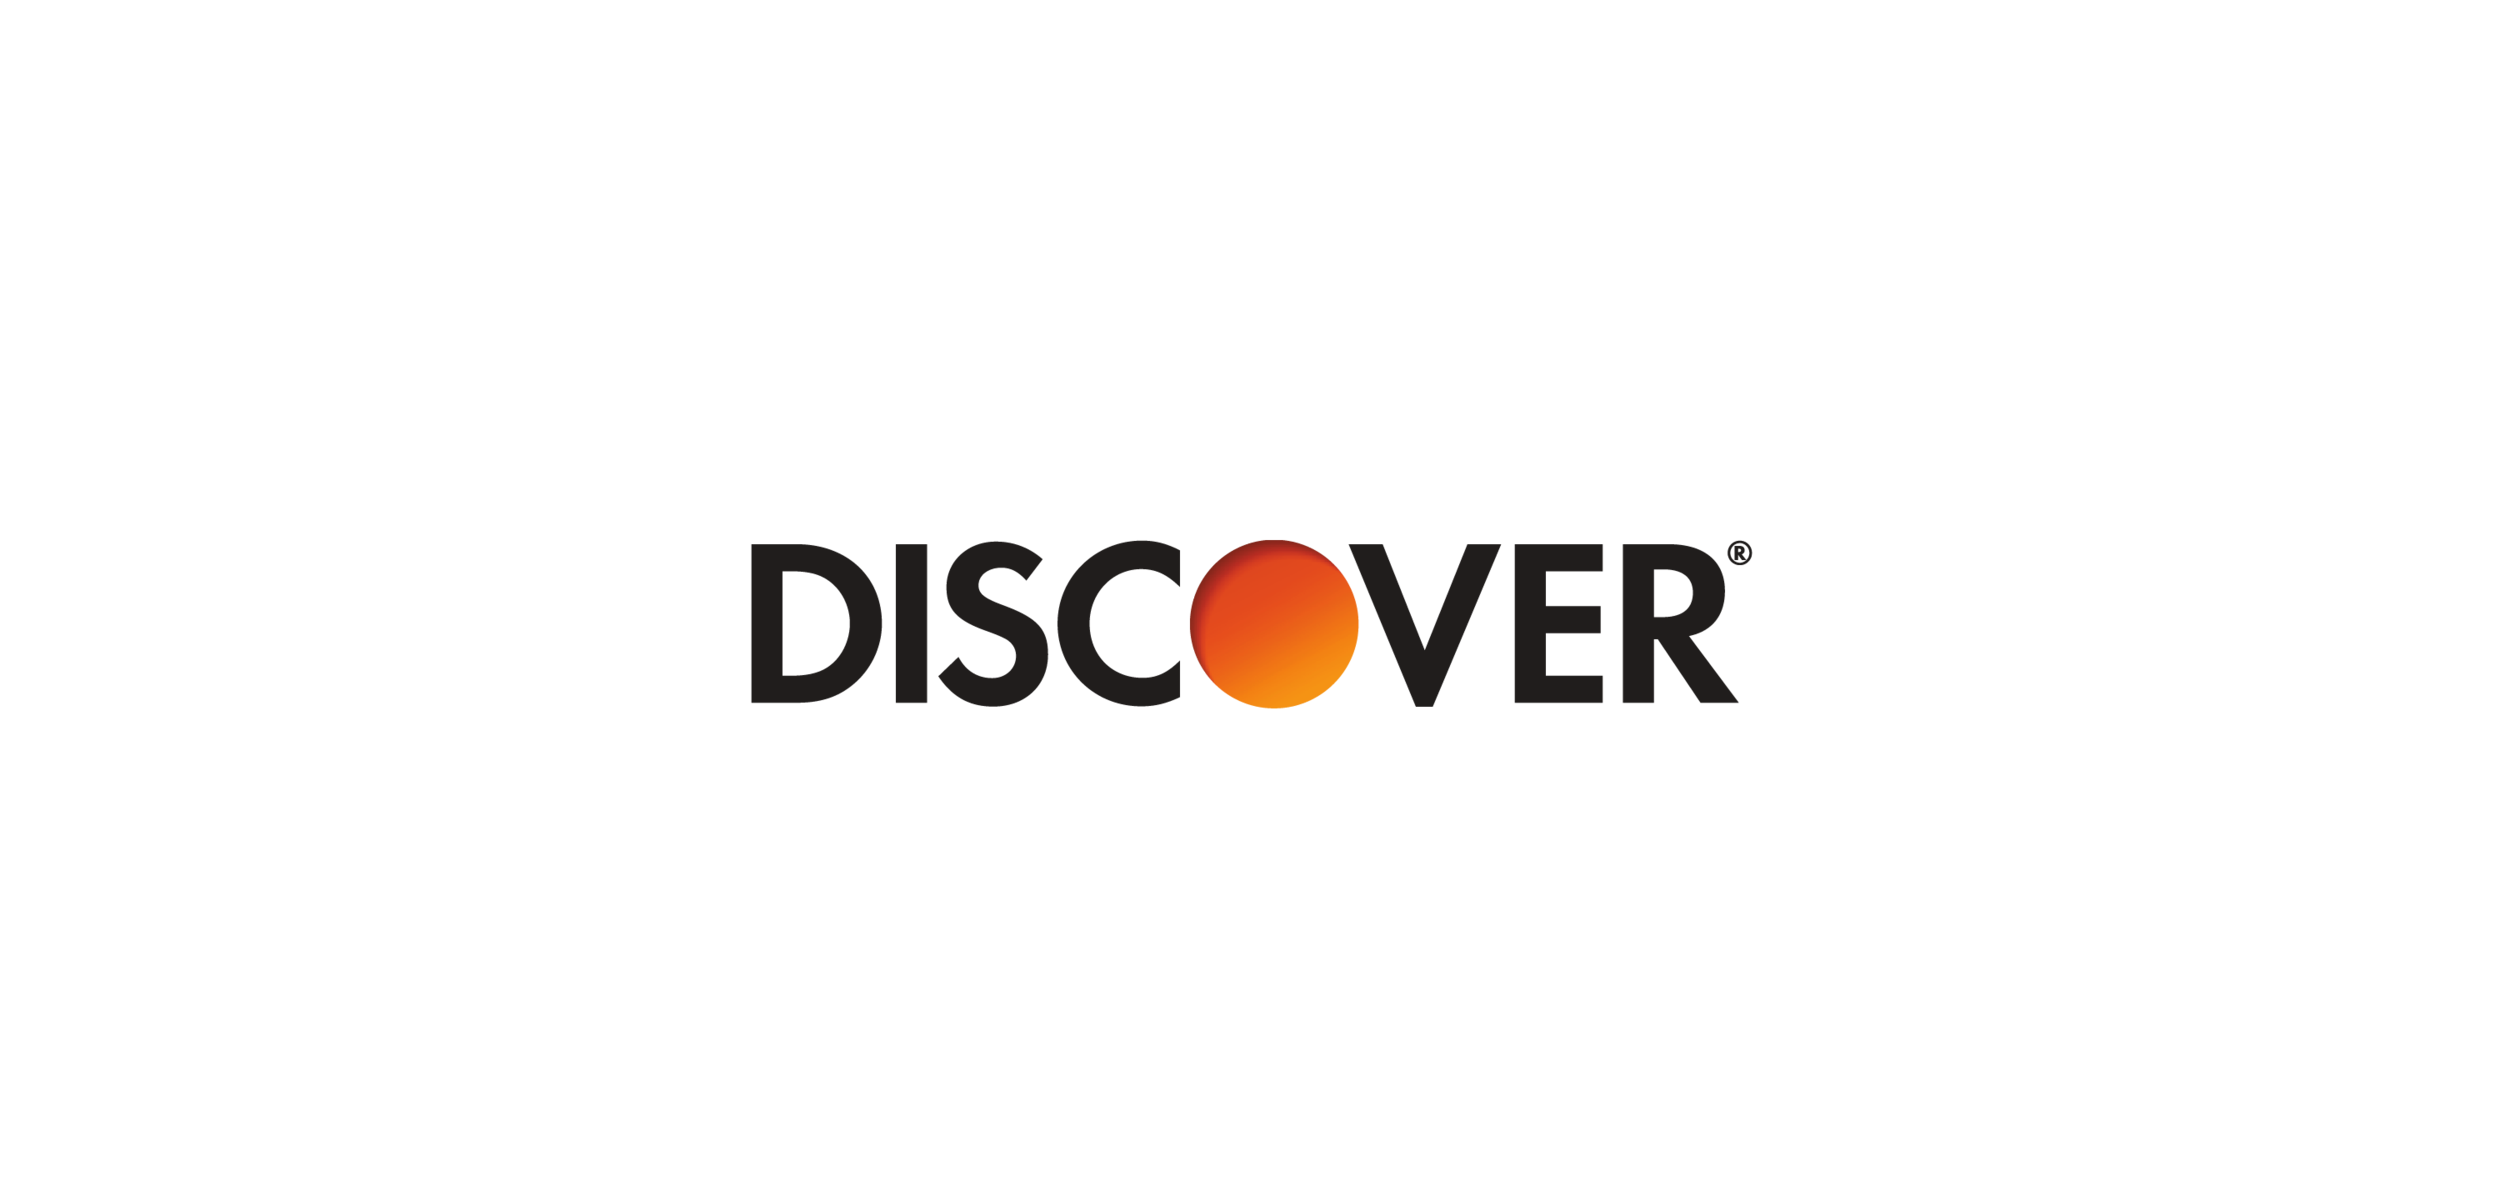 discover-01.png